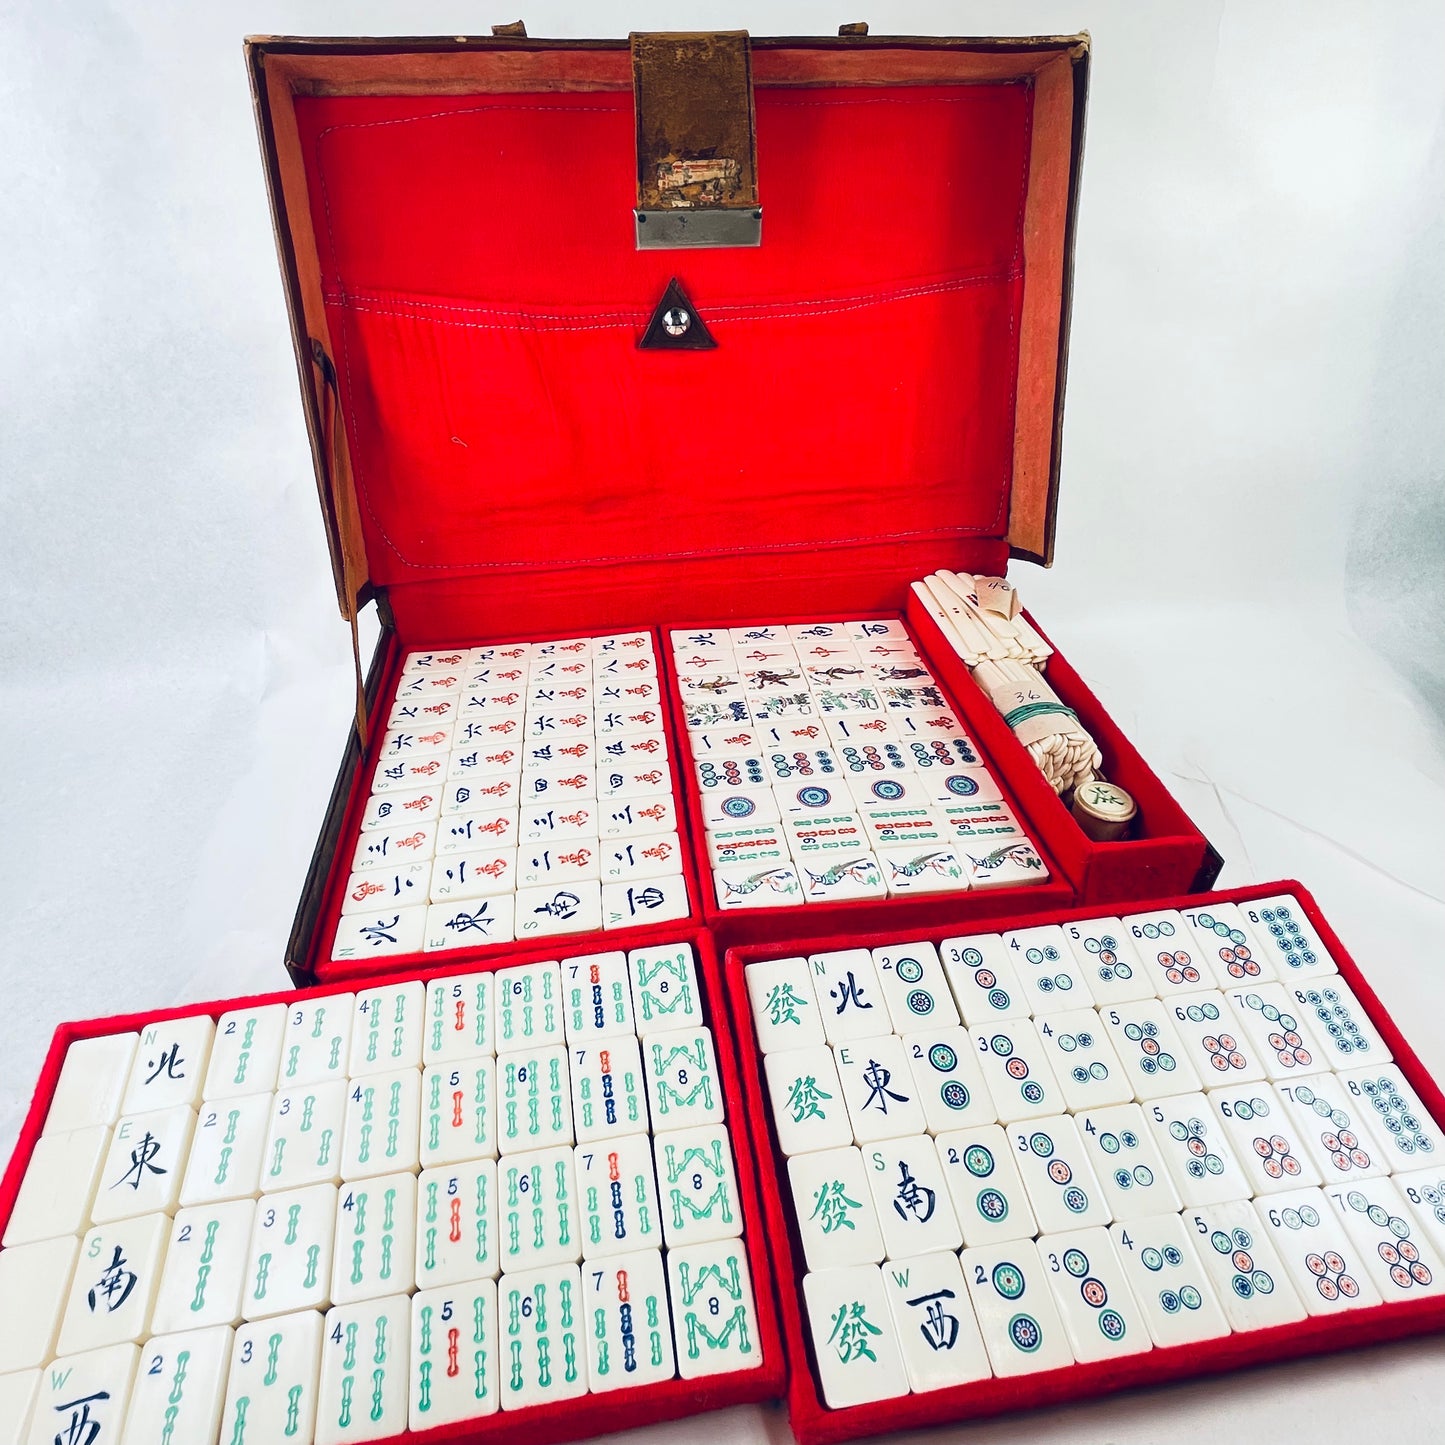 Antique Complete Chinese Mahjong Set With Arabic Numerals 1x 2 x 3 cm Tiles Special Tiles are Maidens Box Includes Betting Sticks Dice w/ Box as well as Direction Disks and holder